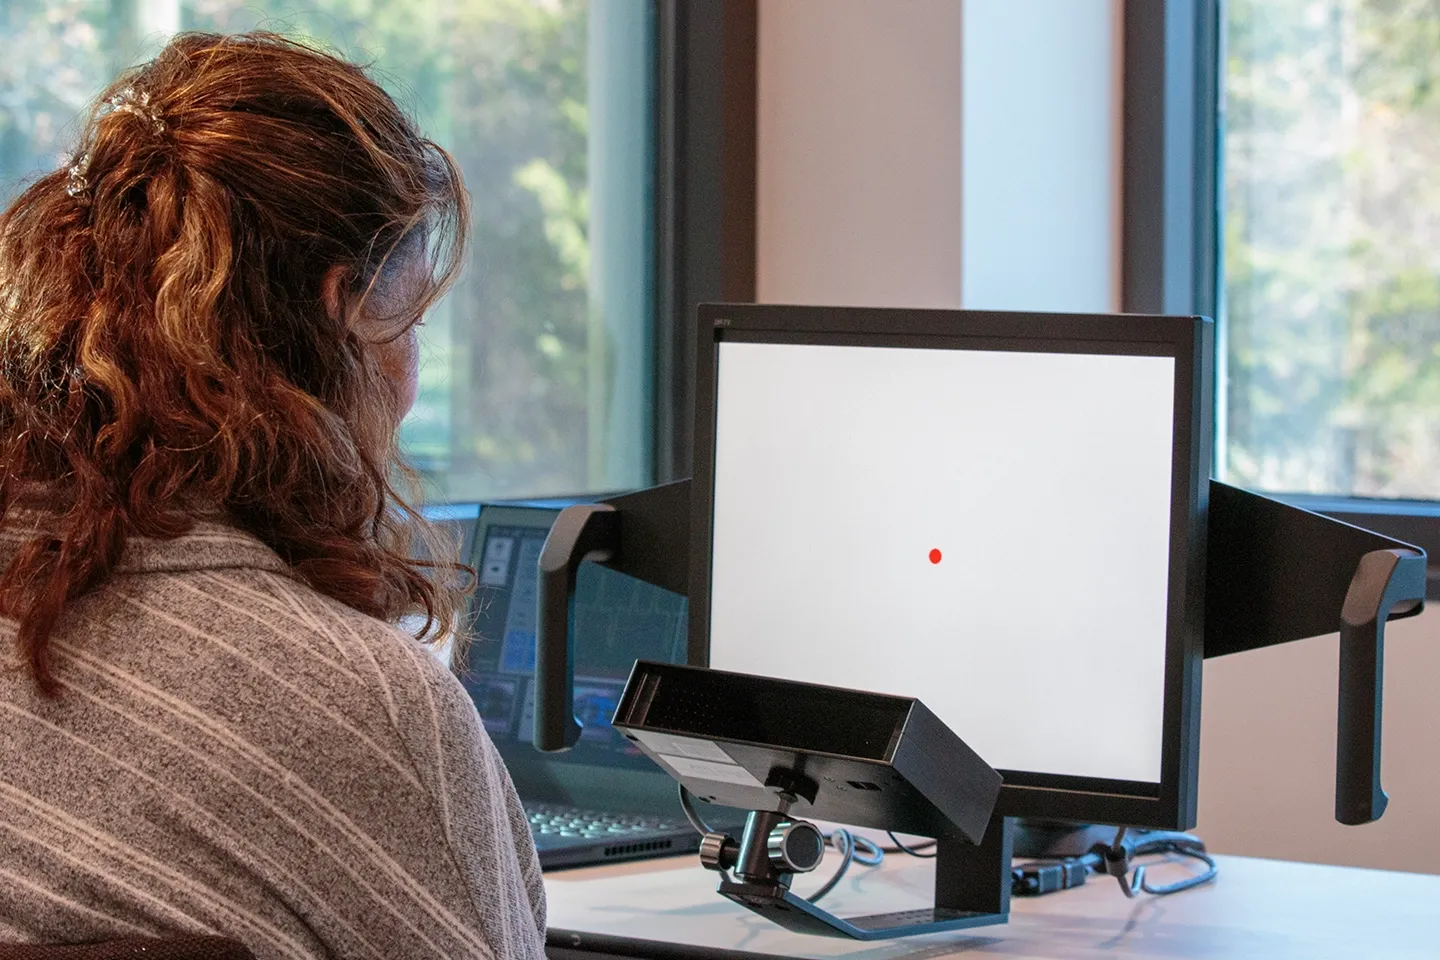 Woman views a computer screen that shows a red dot in the center as point of reference.